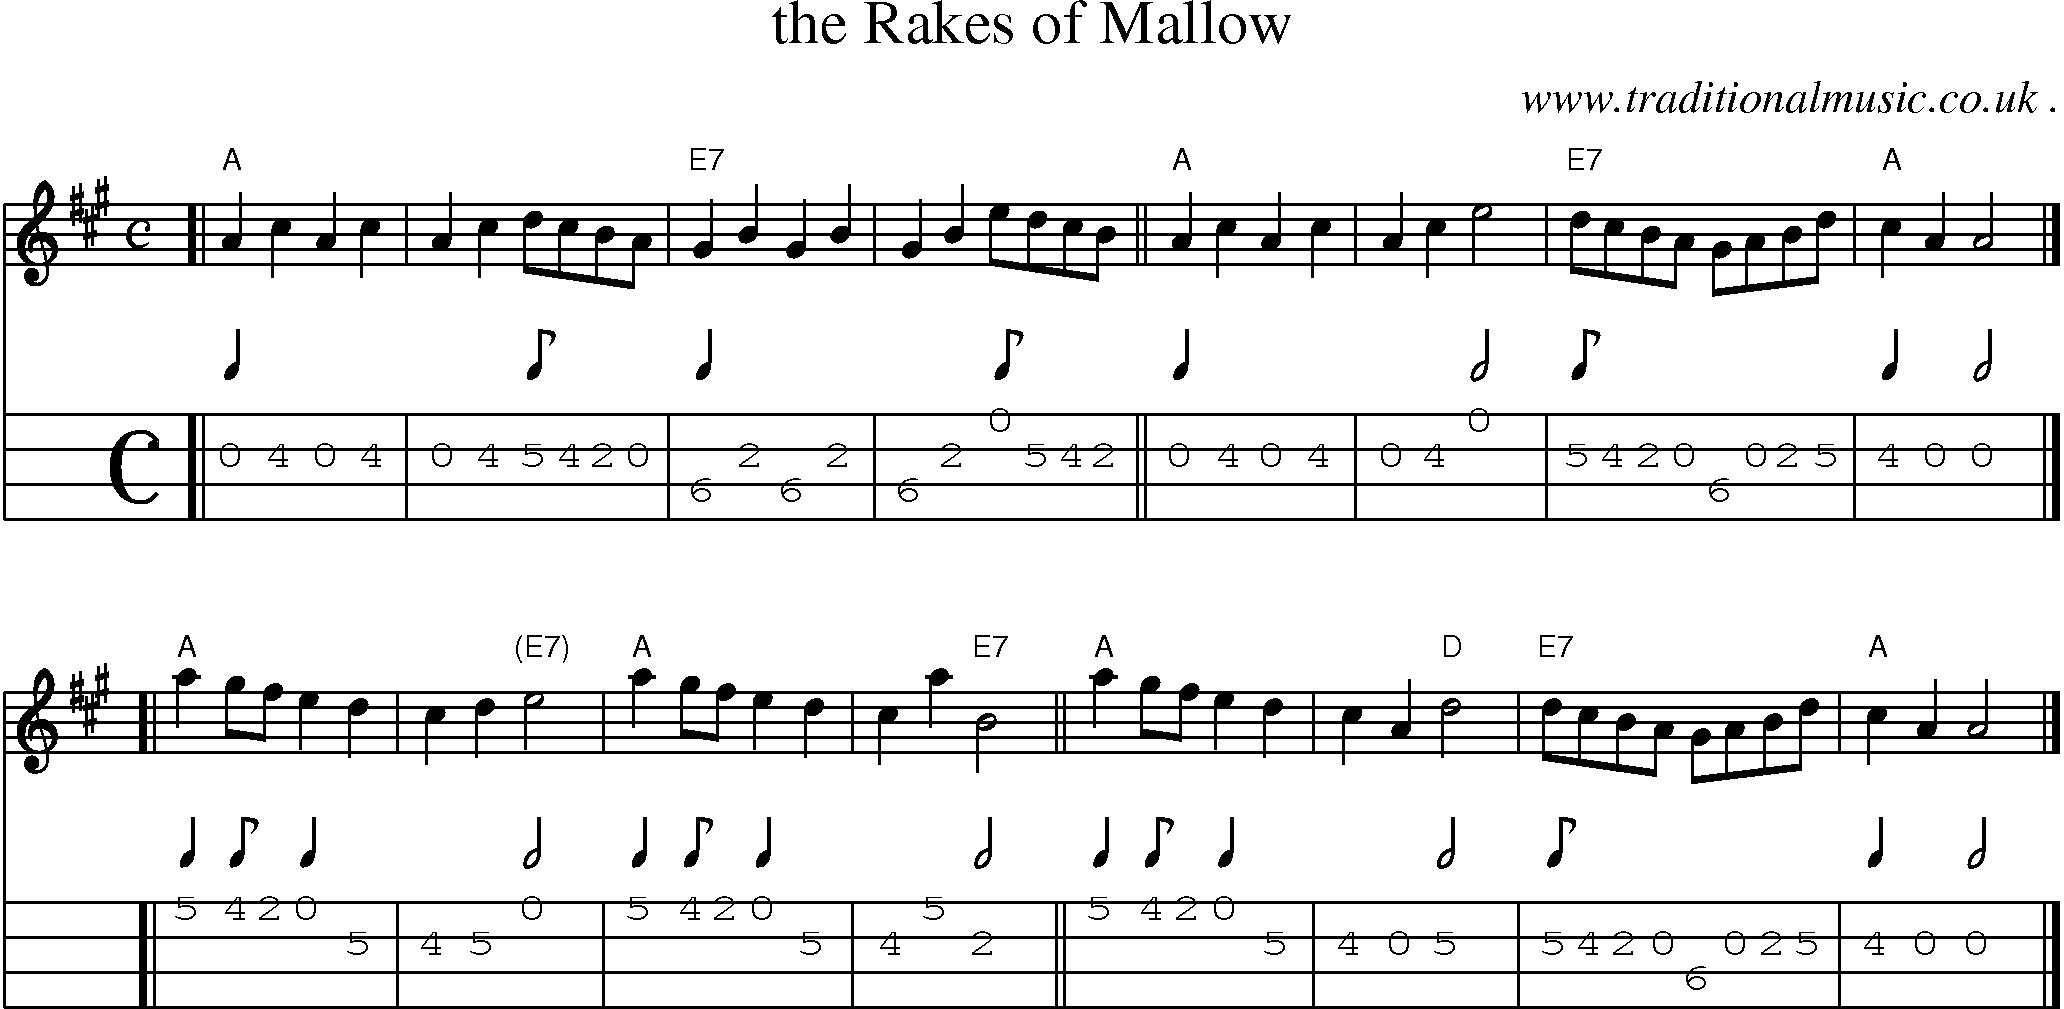 Sheet-music  score, Chords and Mandolin Tabs for The Rakes Of Mallow